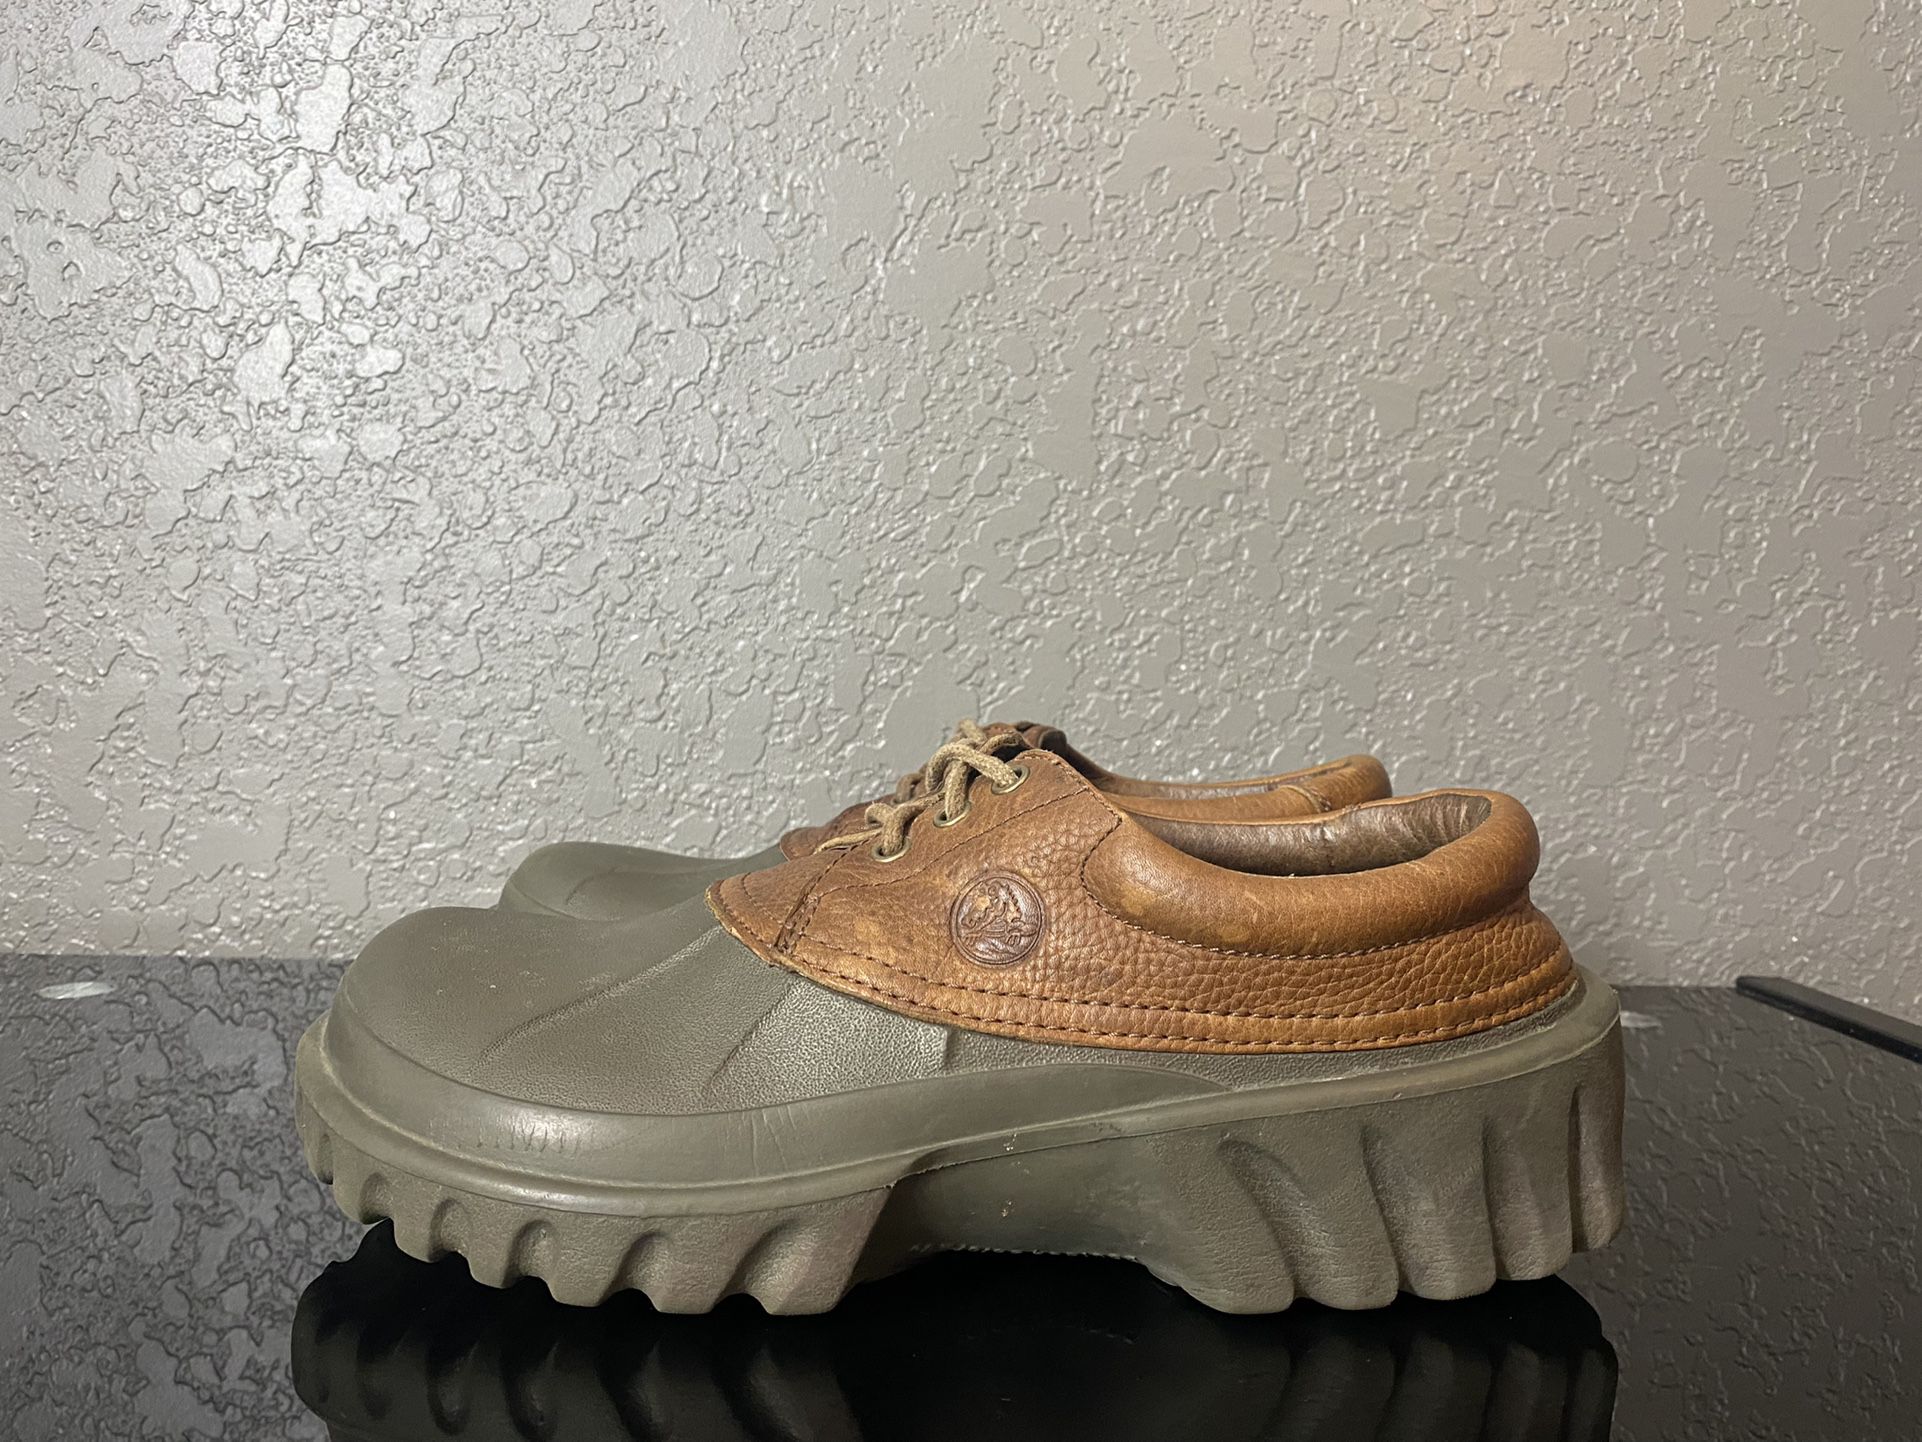 Crocs Islander Men Size 10 12 Brown Pit Crew Lace-Up Boat Shoes Clogs for Sale in Antonio, TX OfferUp